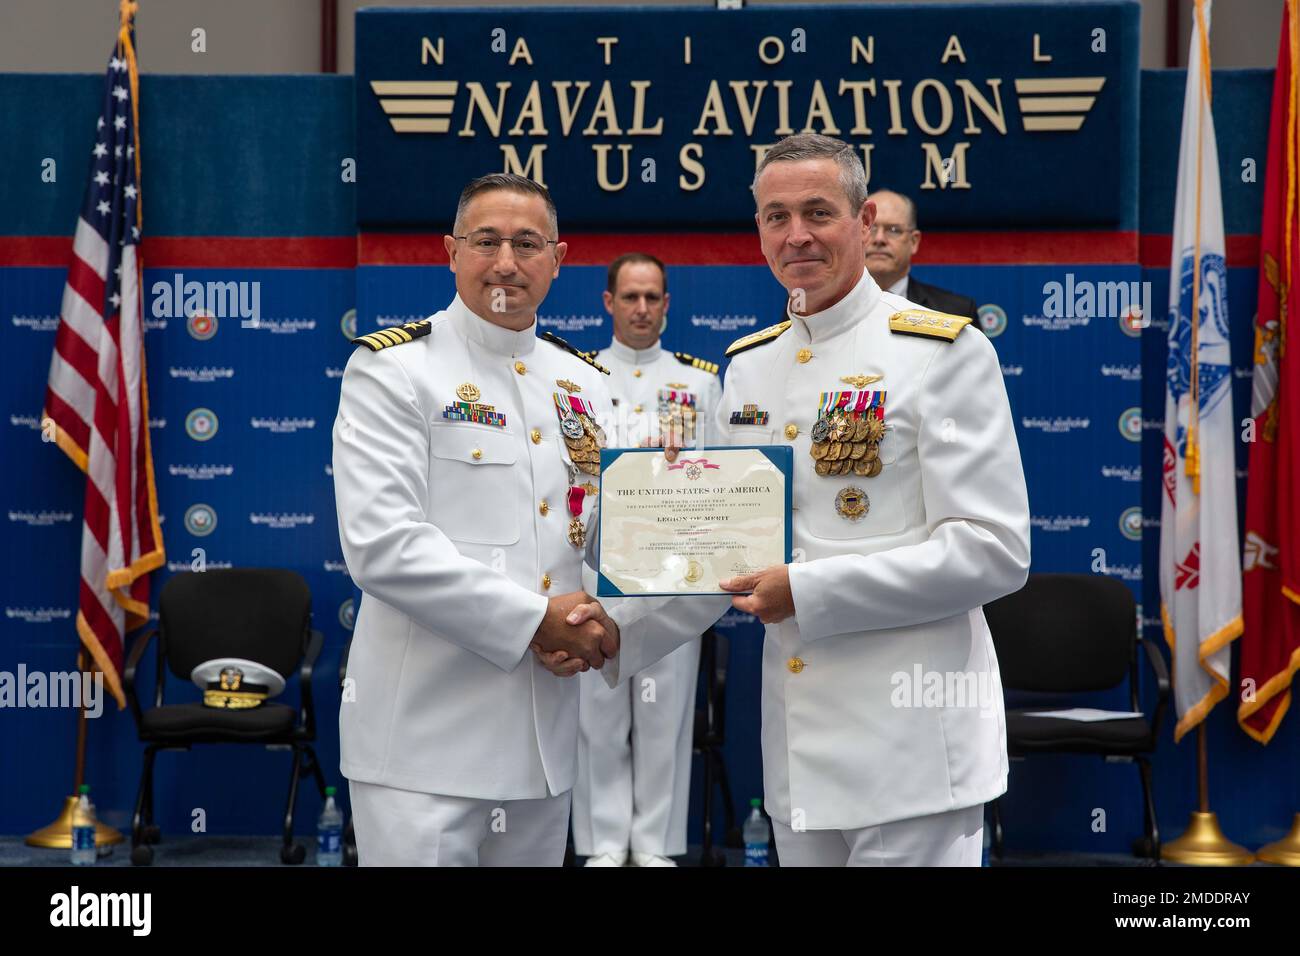 Rear Adm. Pete Garvin, commander, Naval Education and Training Command, right, presents the Legion of Merit to Capt. Marc W. Ratkus, commanding officer, Center for Information Warfare Training (CIWT), left, during the CIWT change of command ceremony at the National Naval Aviation Museum, July 22, 2022.  Capt. Christopher G. Bryant relieved Ratkus as CIWT’s commanding officer, while Ratkus also retired, concluding a 39-year military career. CIWT is charged with developing the future technical cadre of the Navy’s information warfare community. Stock Photo